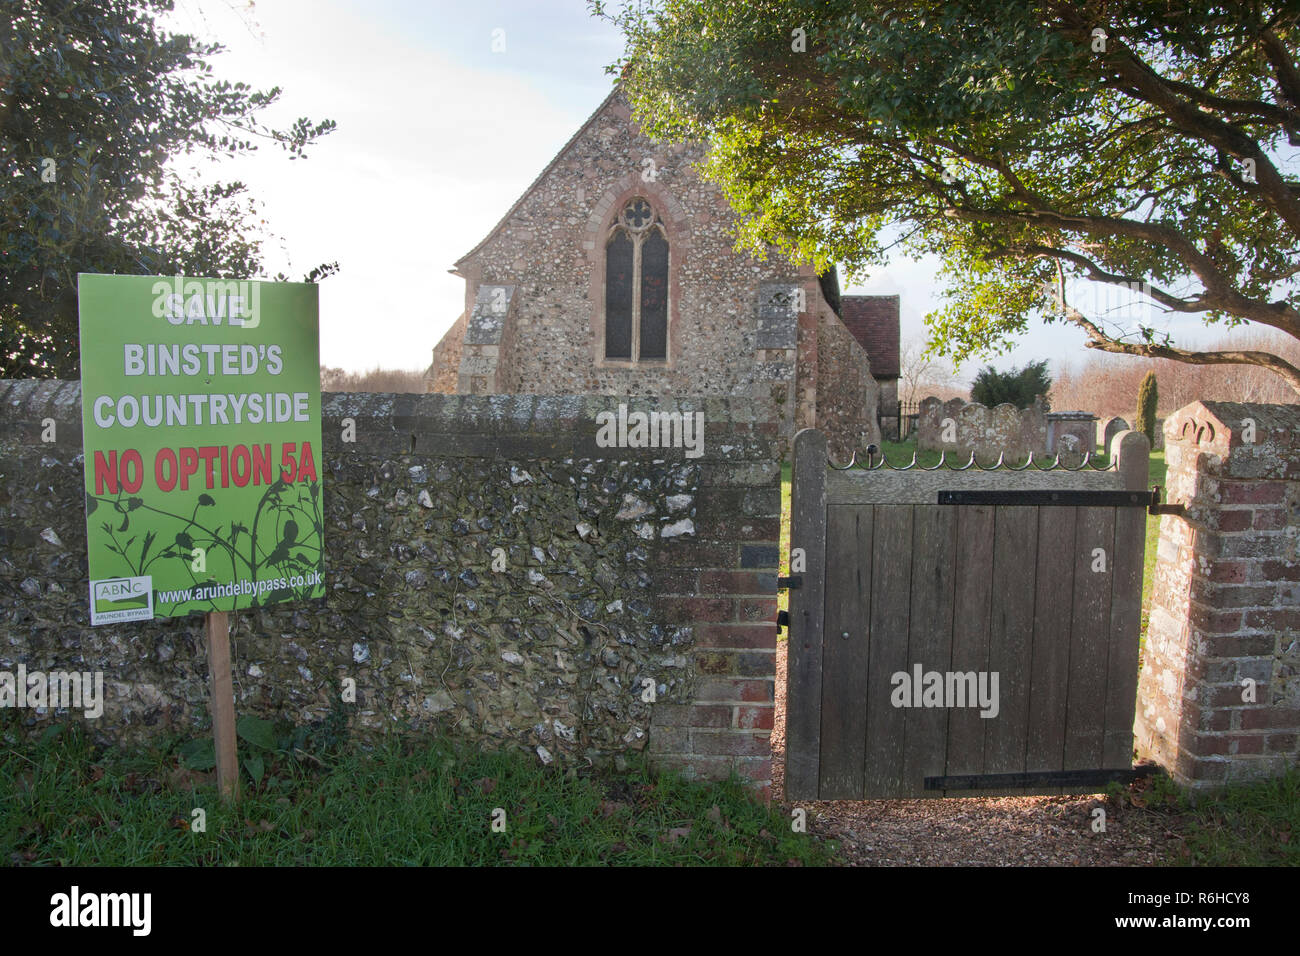 No Option 5A protest sign outside St. Mary's church objecting to the new Arundel bypass, Binsted, West Sussex. Binsted is a village steeped in folklor Stock Photo